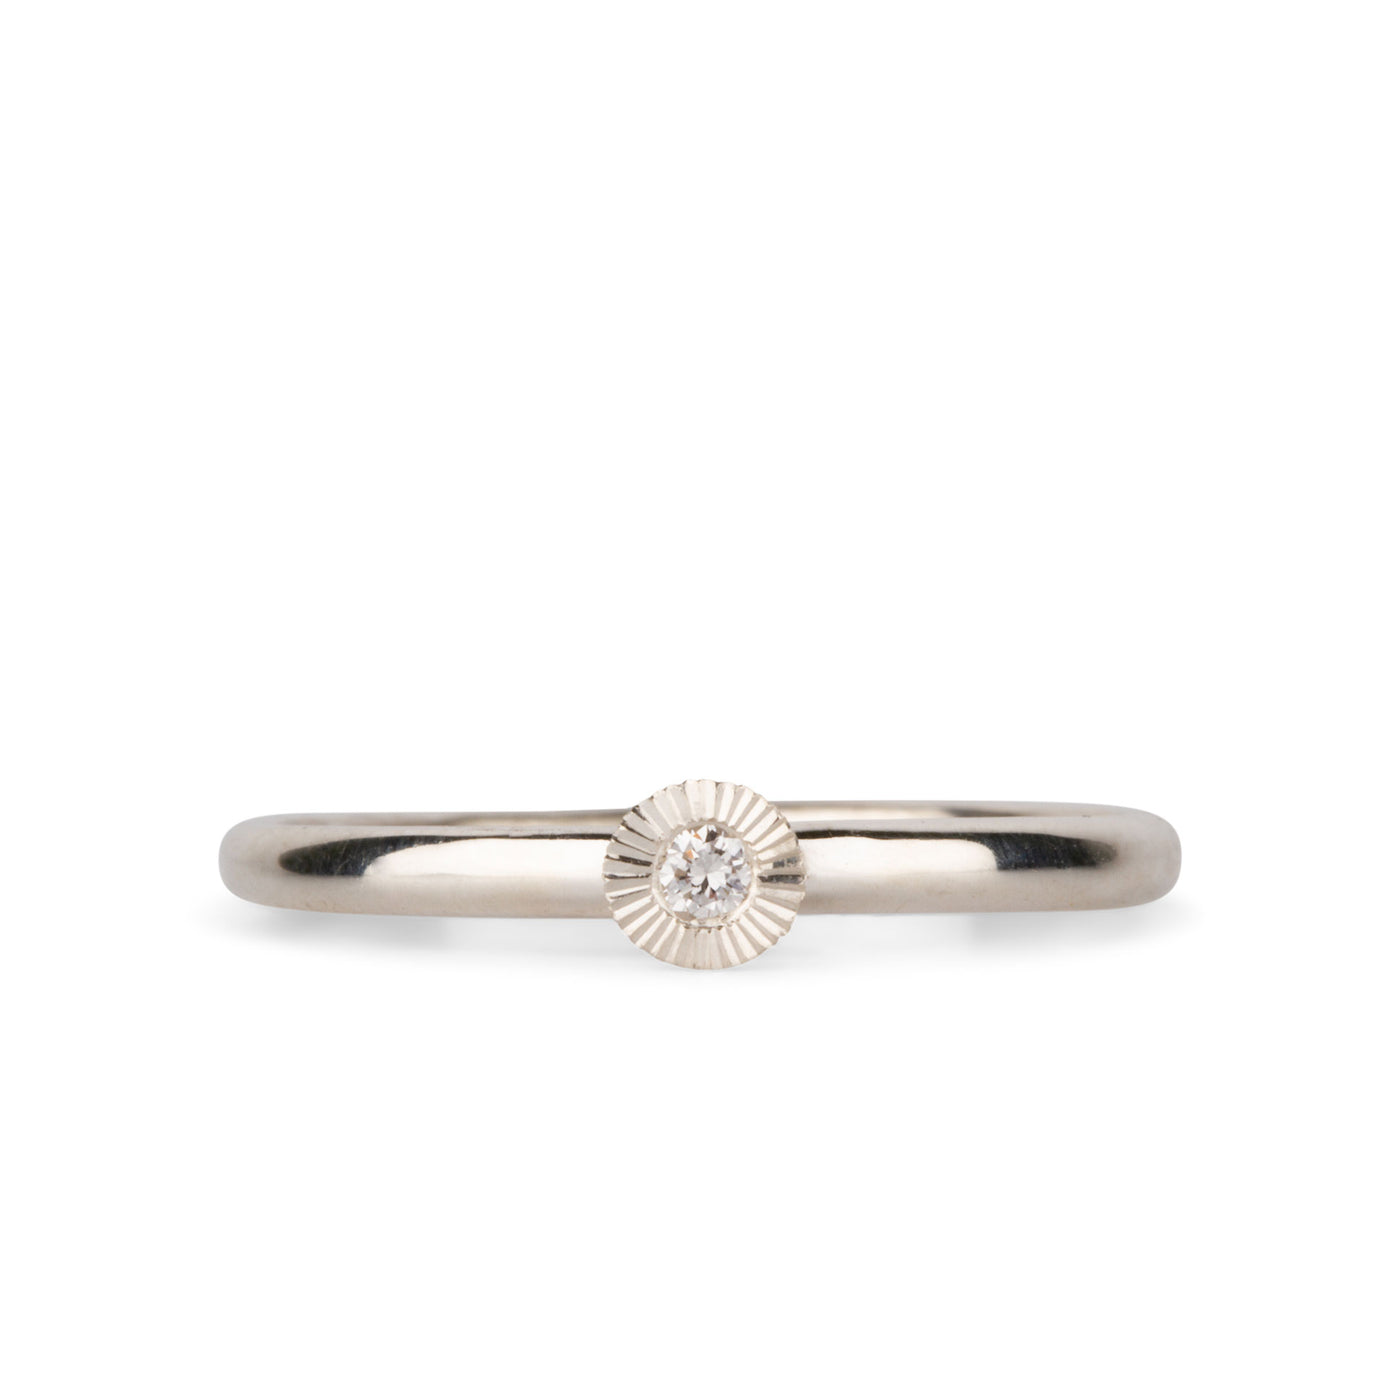 sterling silver small aurora stacking ring with a 2mm center diamond and engraved border